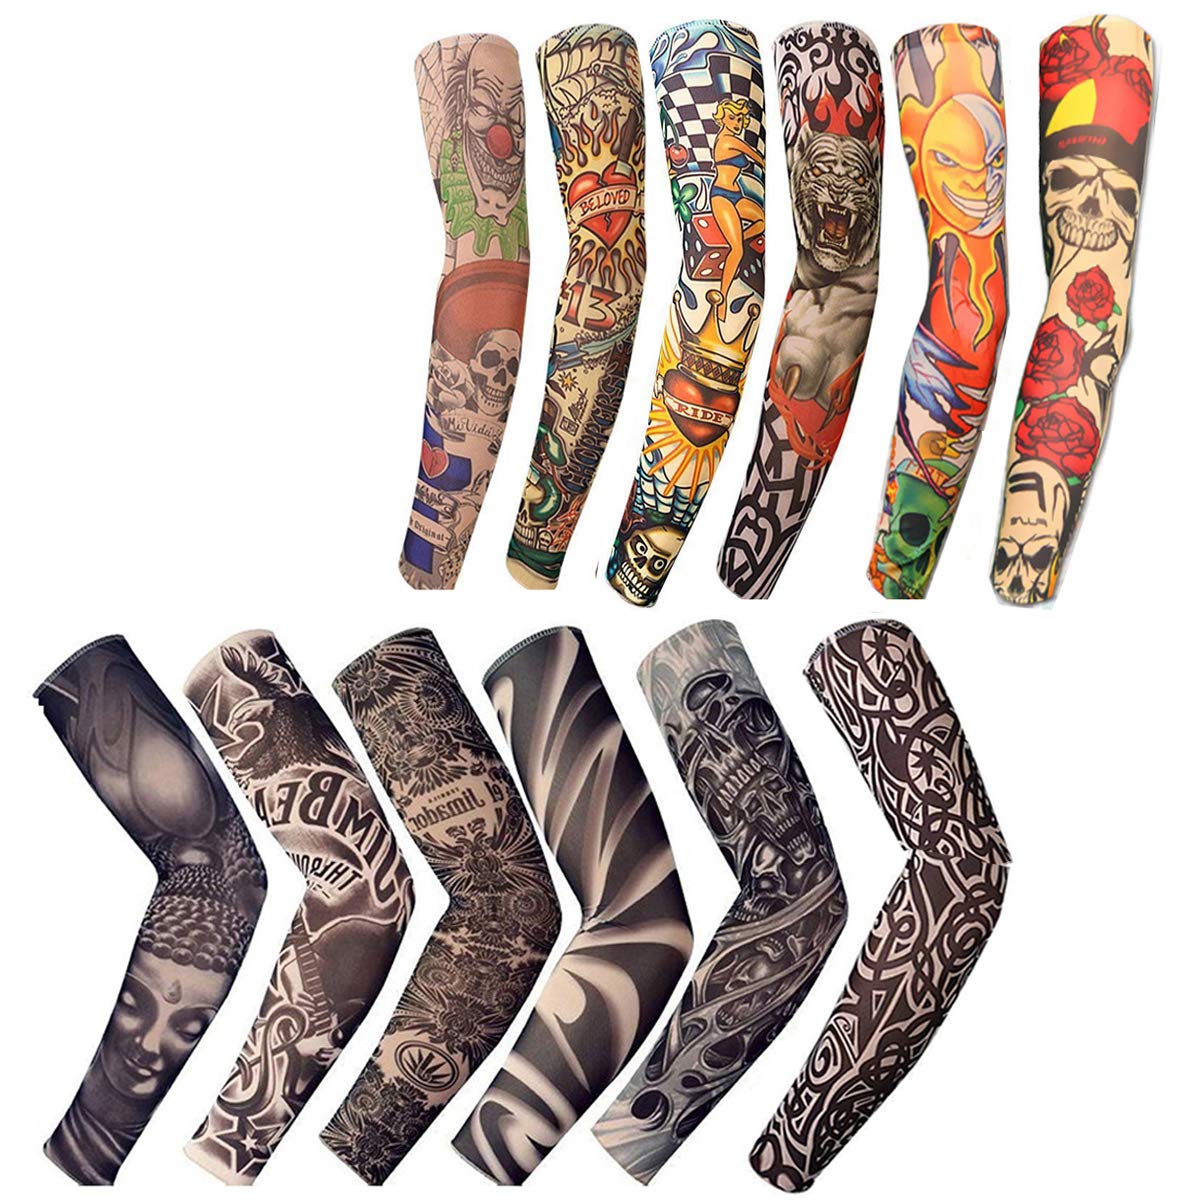 12 PCS Temporary Tattoo Sleeves for Men Women Seamless,Arts Arm Sunscreen  Fake Piercings Tattoos Cover Up Sleeves,Designs Tiger, Crown Heart, Skull,  Tribal,Etc Unisex Stretchable Cosplay Accessories